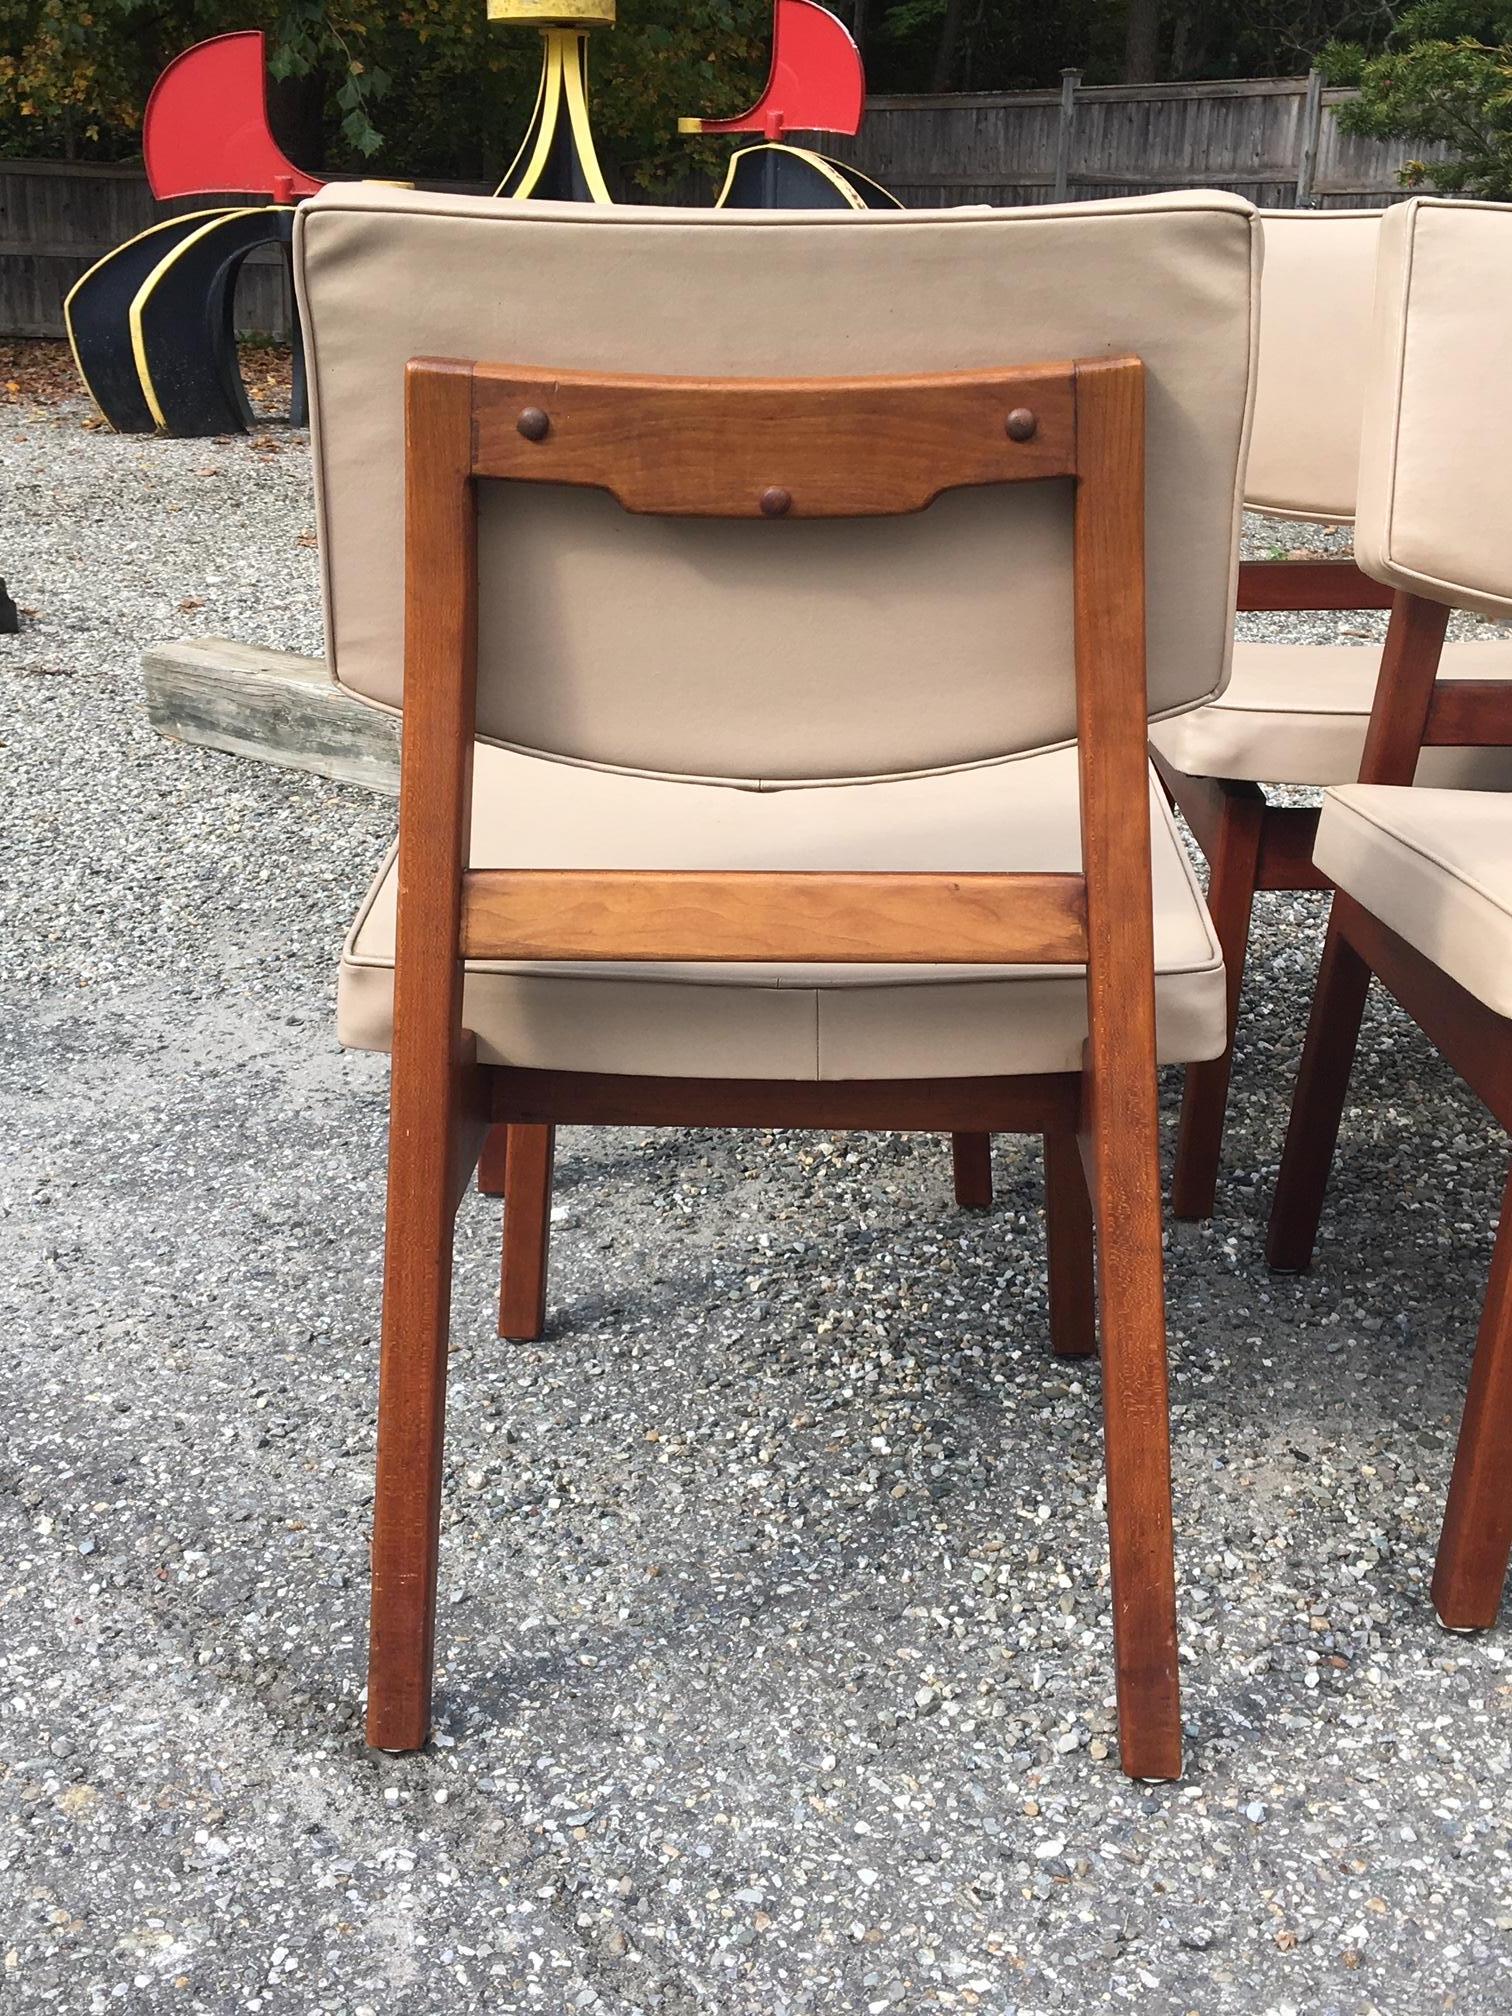 Mid-20th Century Set of 8 Original Jens Risom Walnut Dining Chairs in Original Leather Upholstery